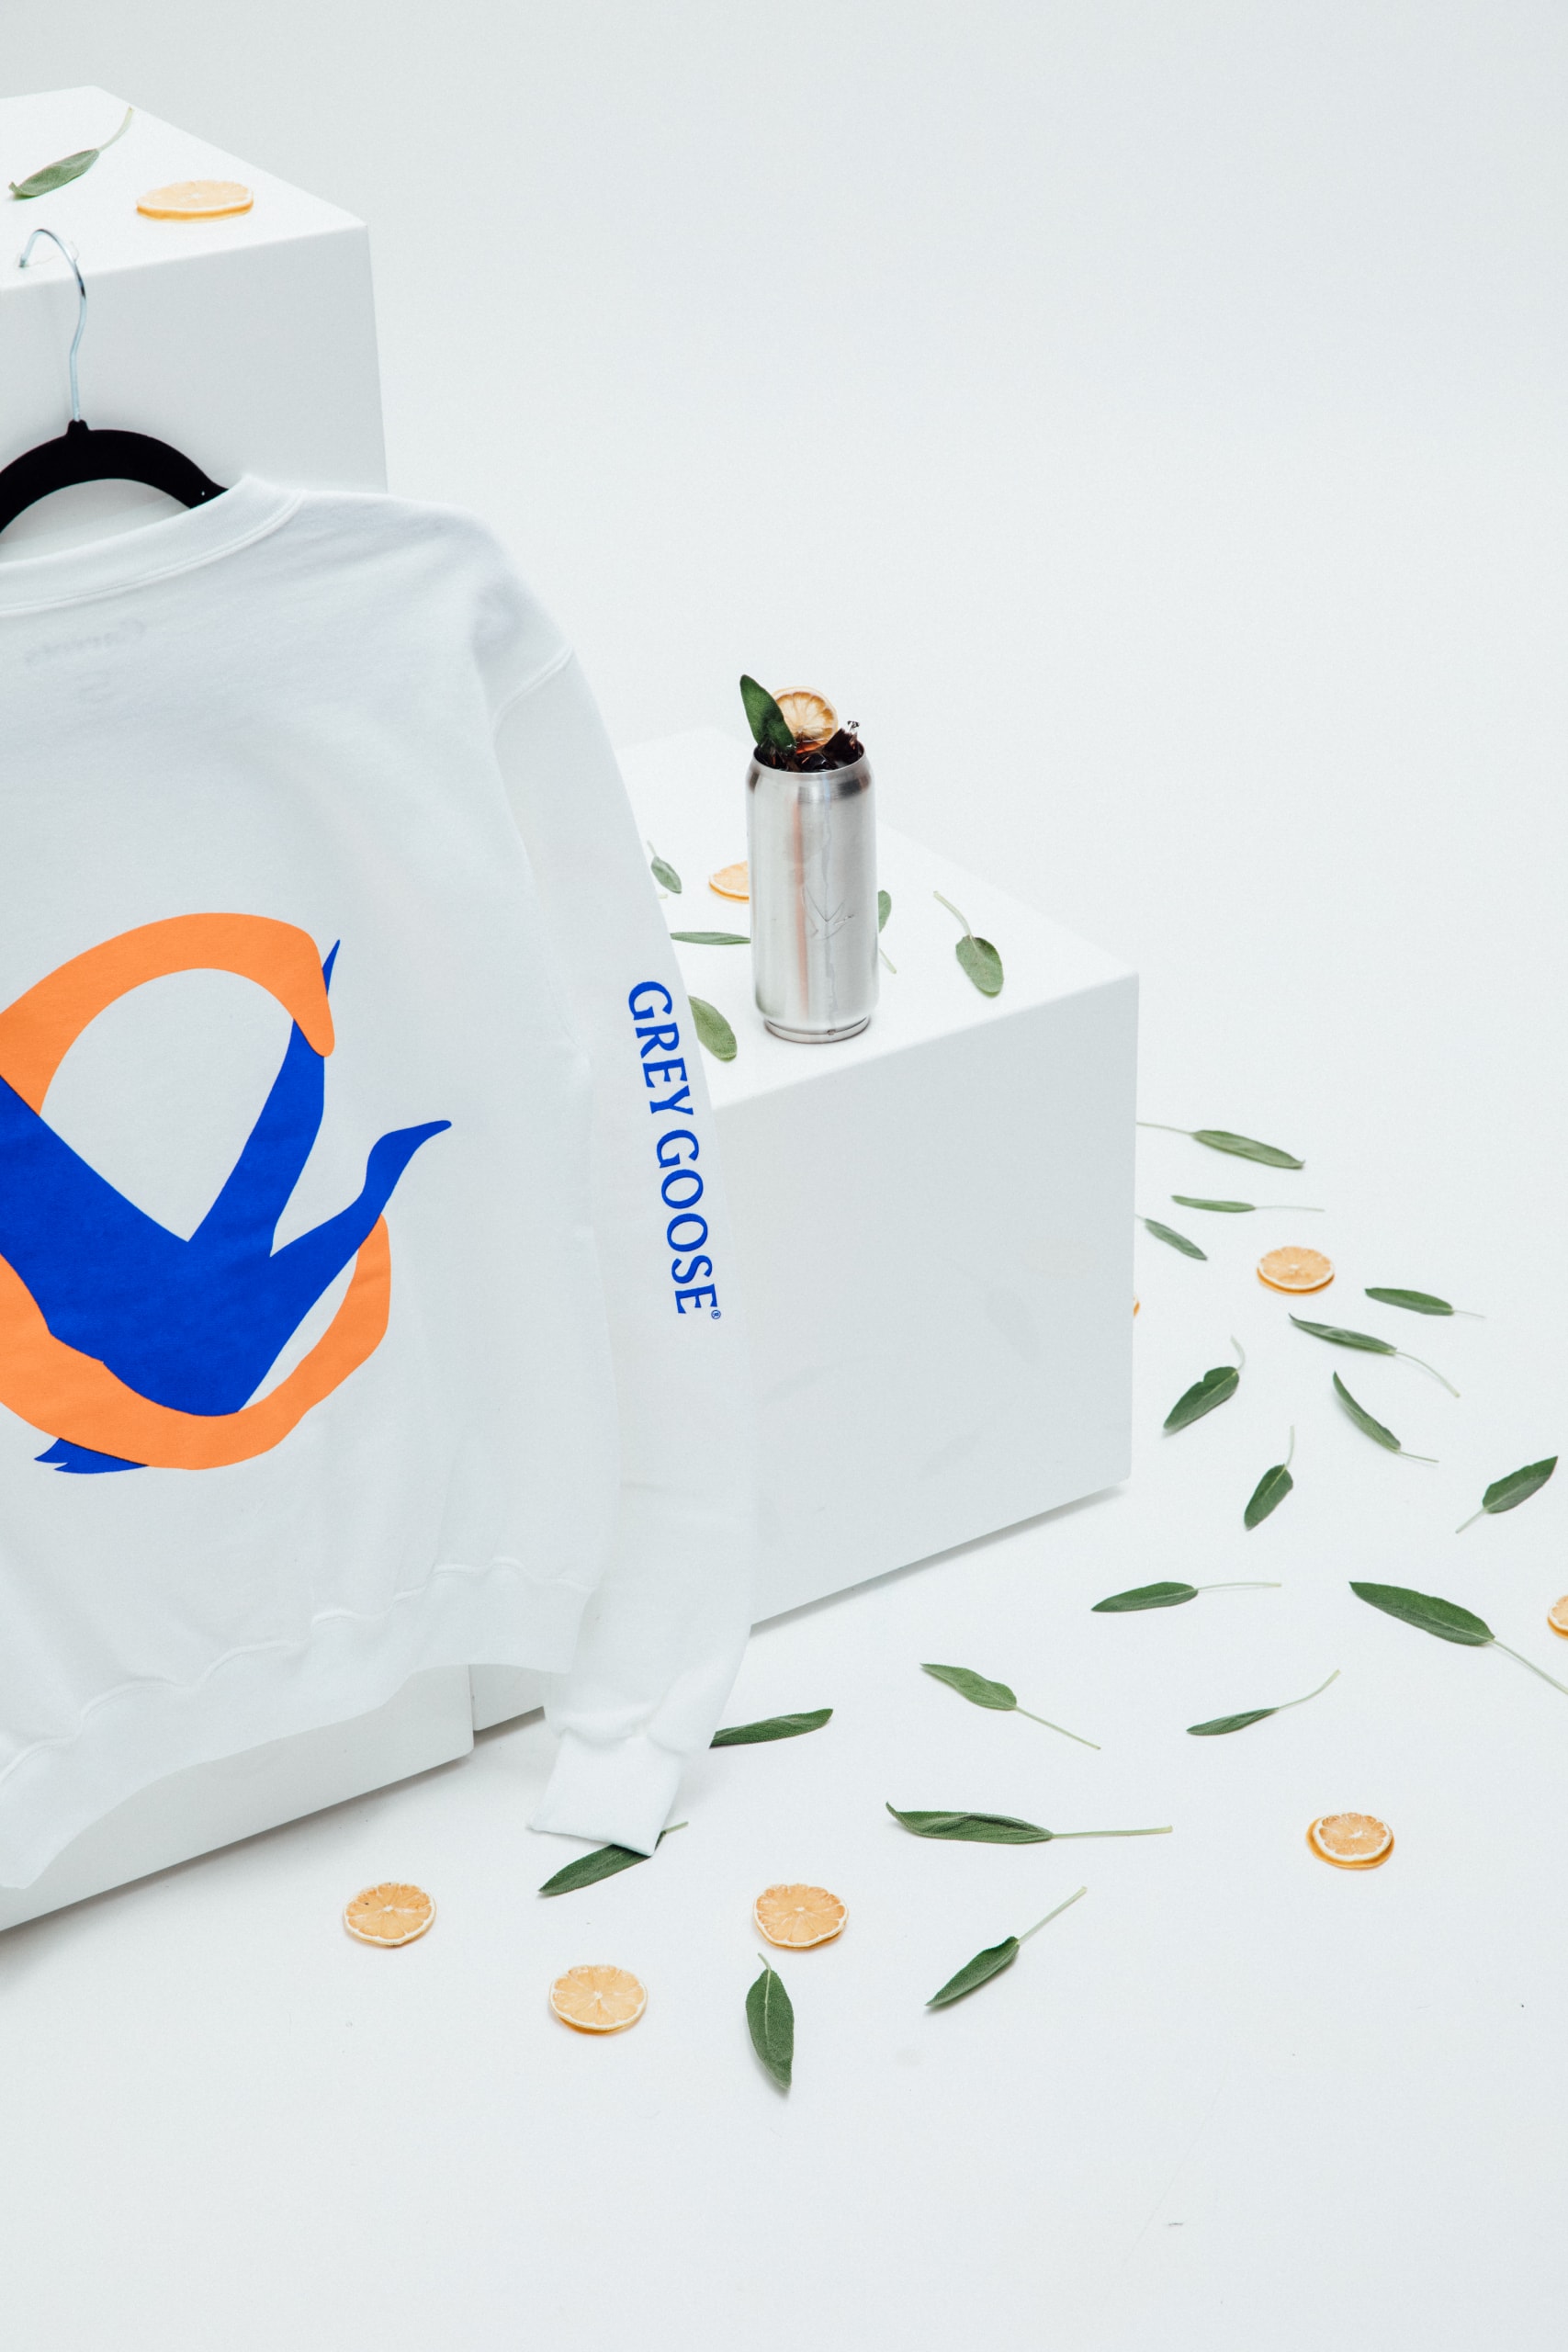 Anwar Carrots x Grey Goose Limited Edition Holiday Sweater Celebrate cocktail kits vodka  